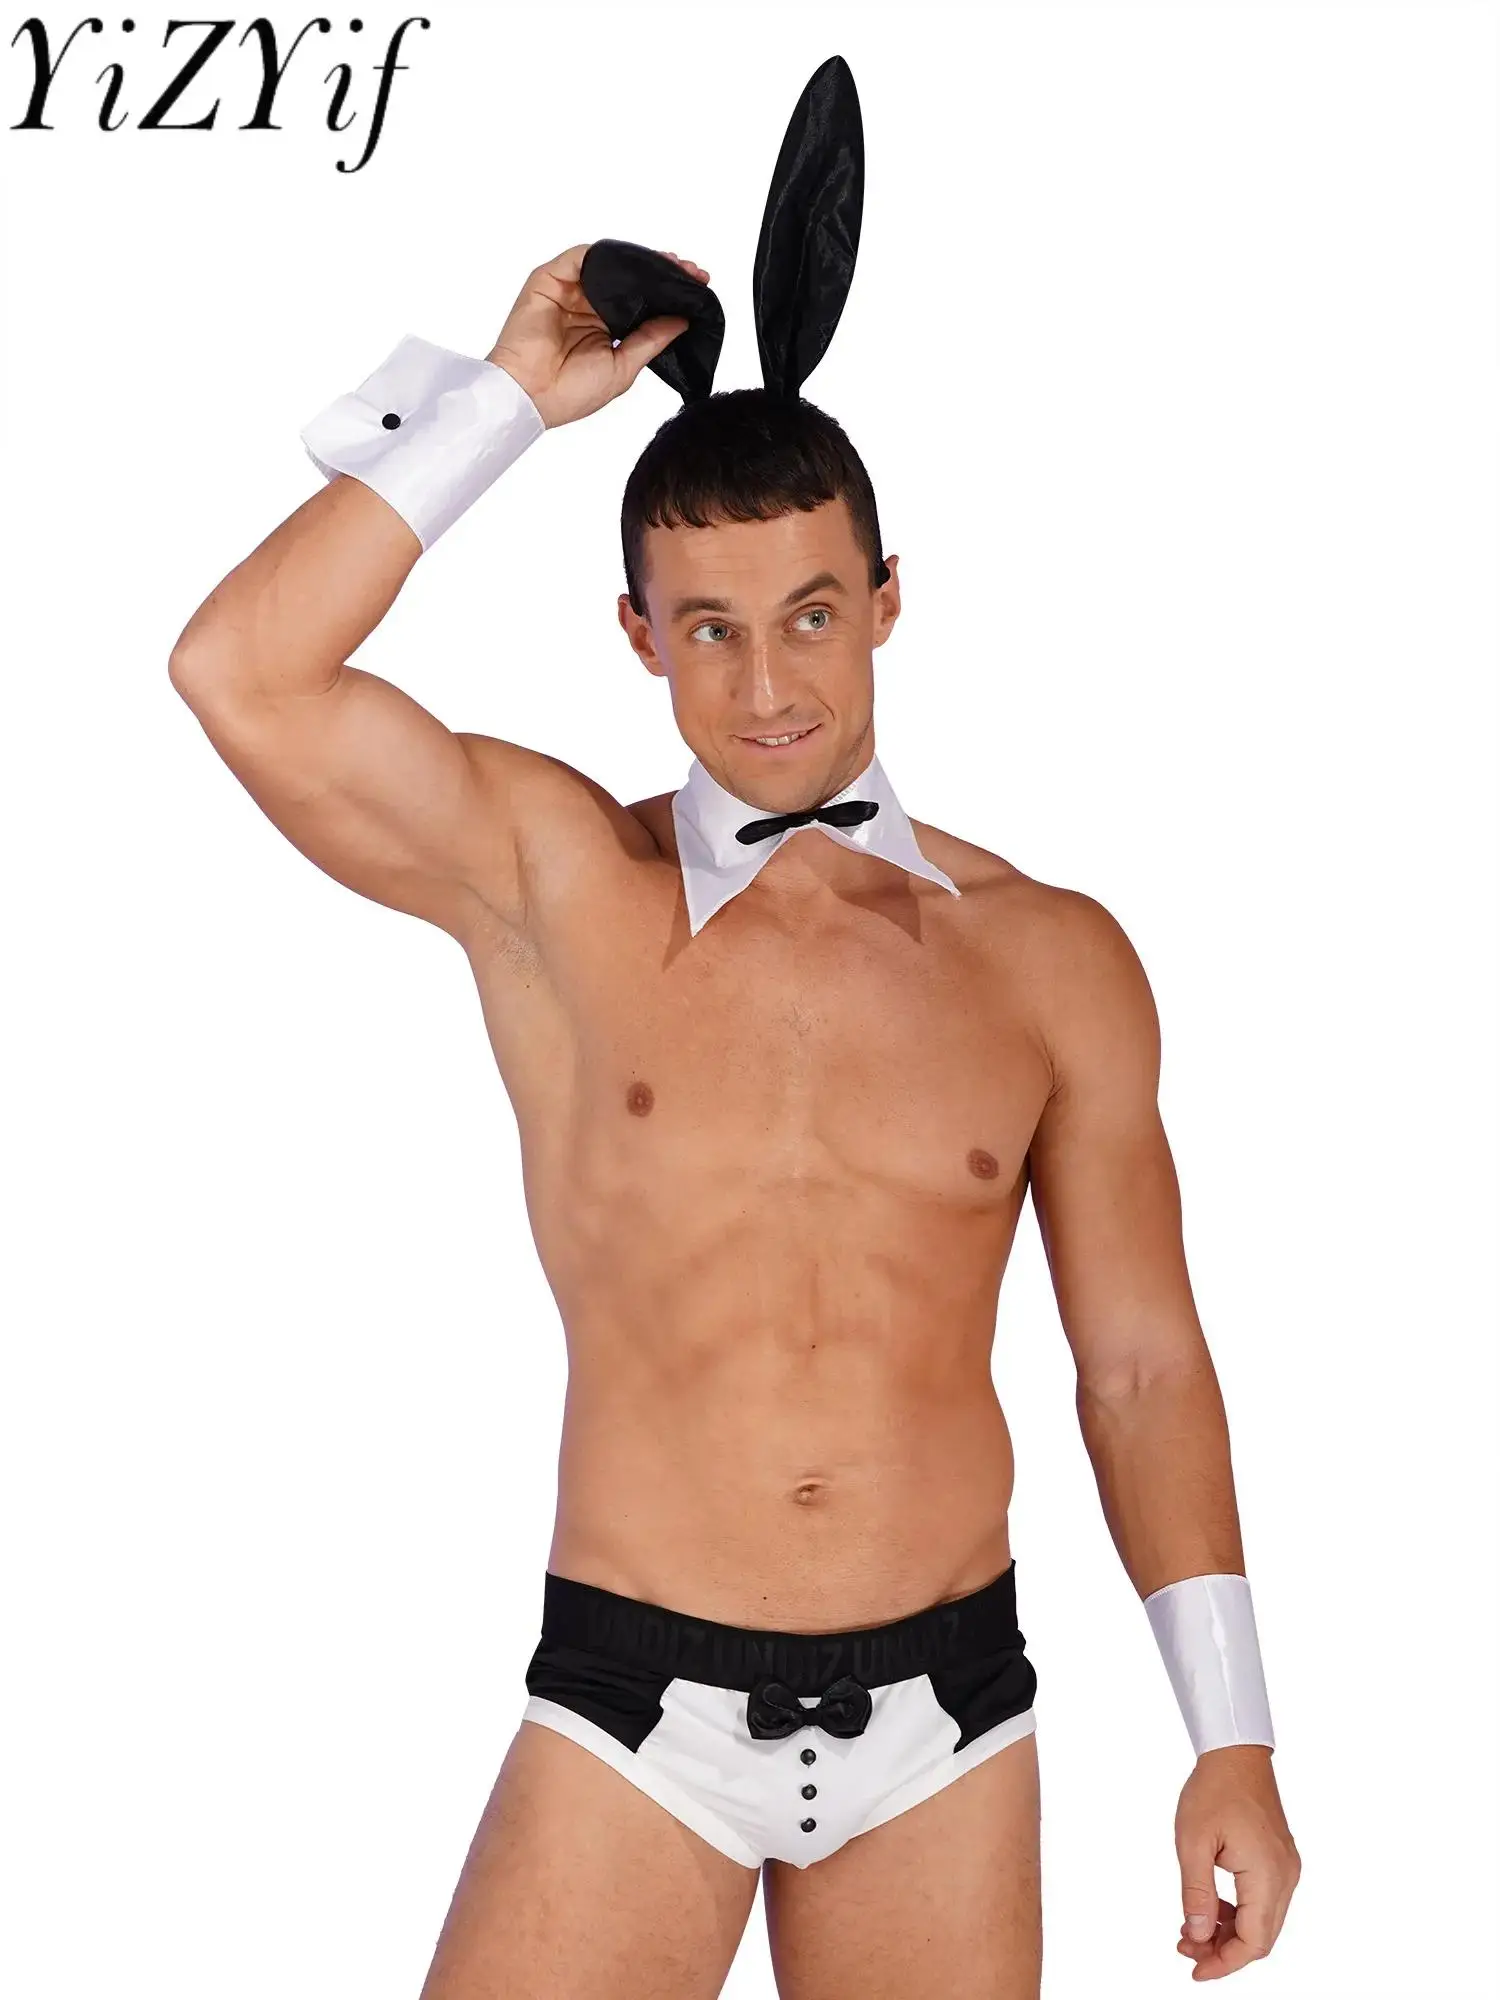 

Men's Sexy Bartender Costume Waiter Tuxedo Outfit Erotic Role Play Clubwear Underwear Set Briefs Bunny Cosplay Lingerie Outfits